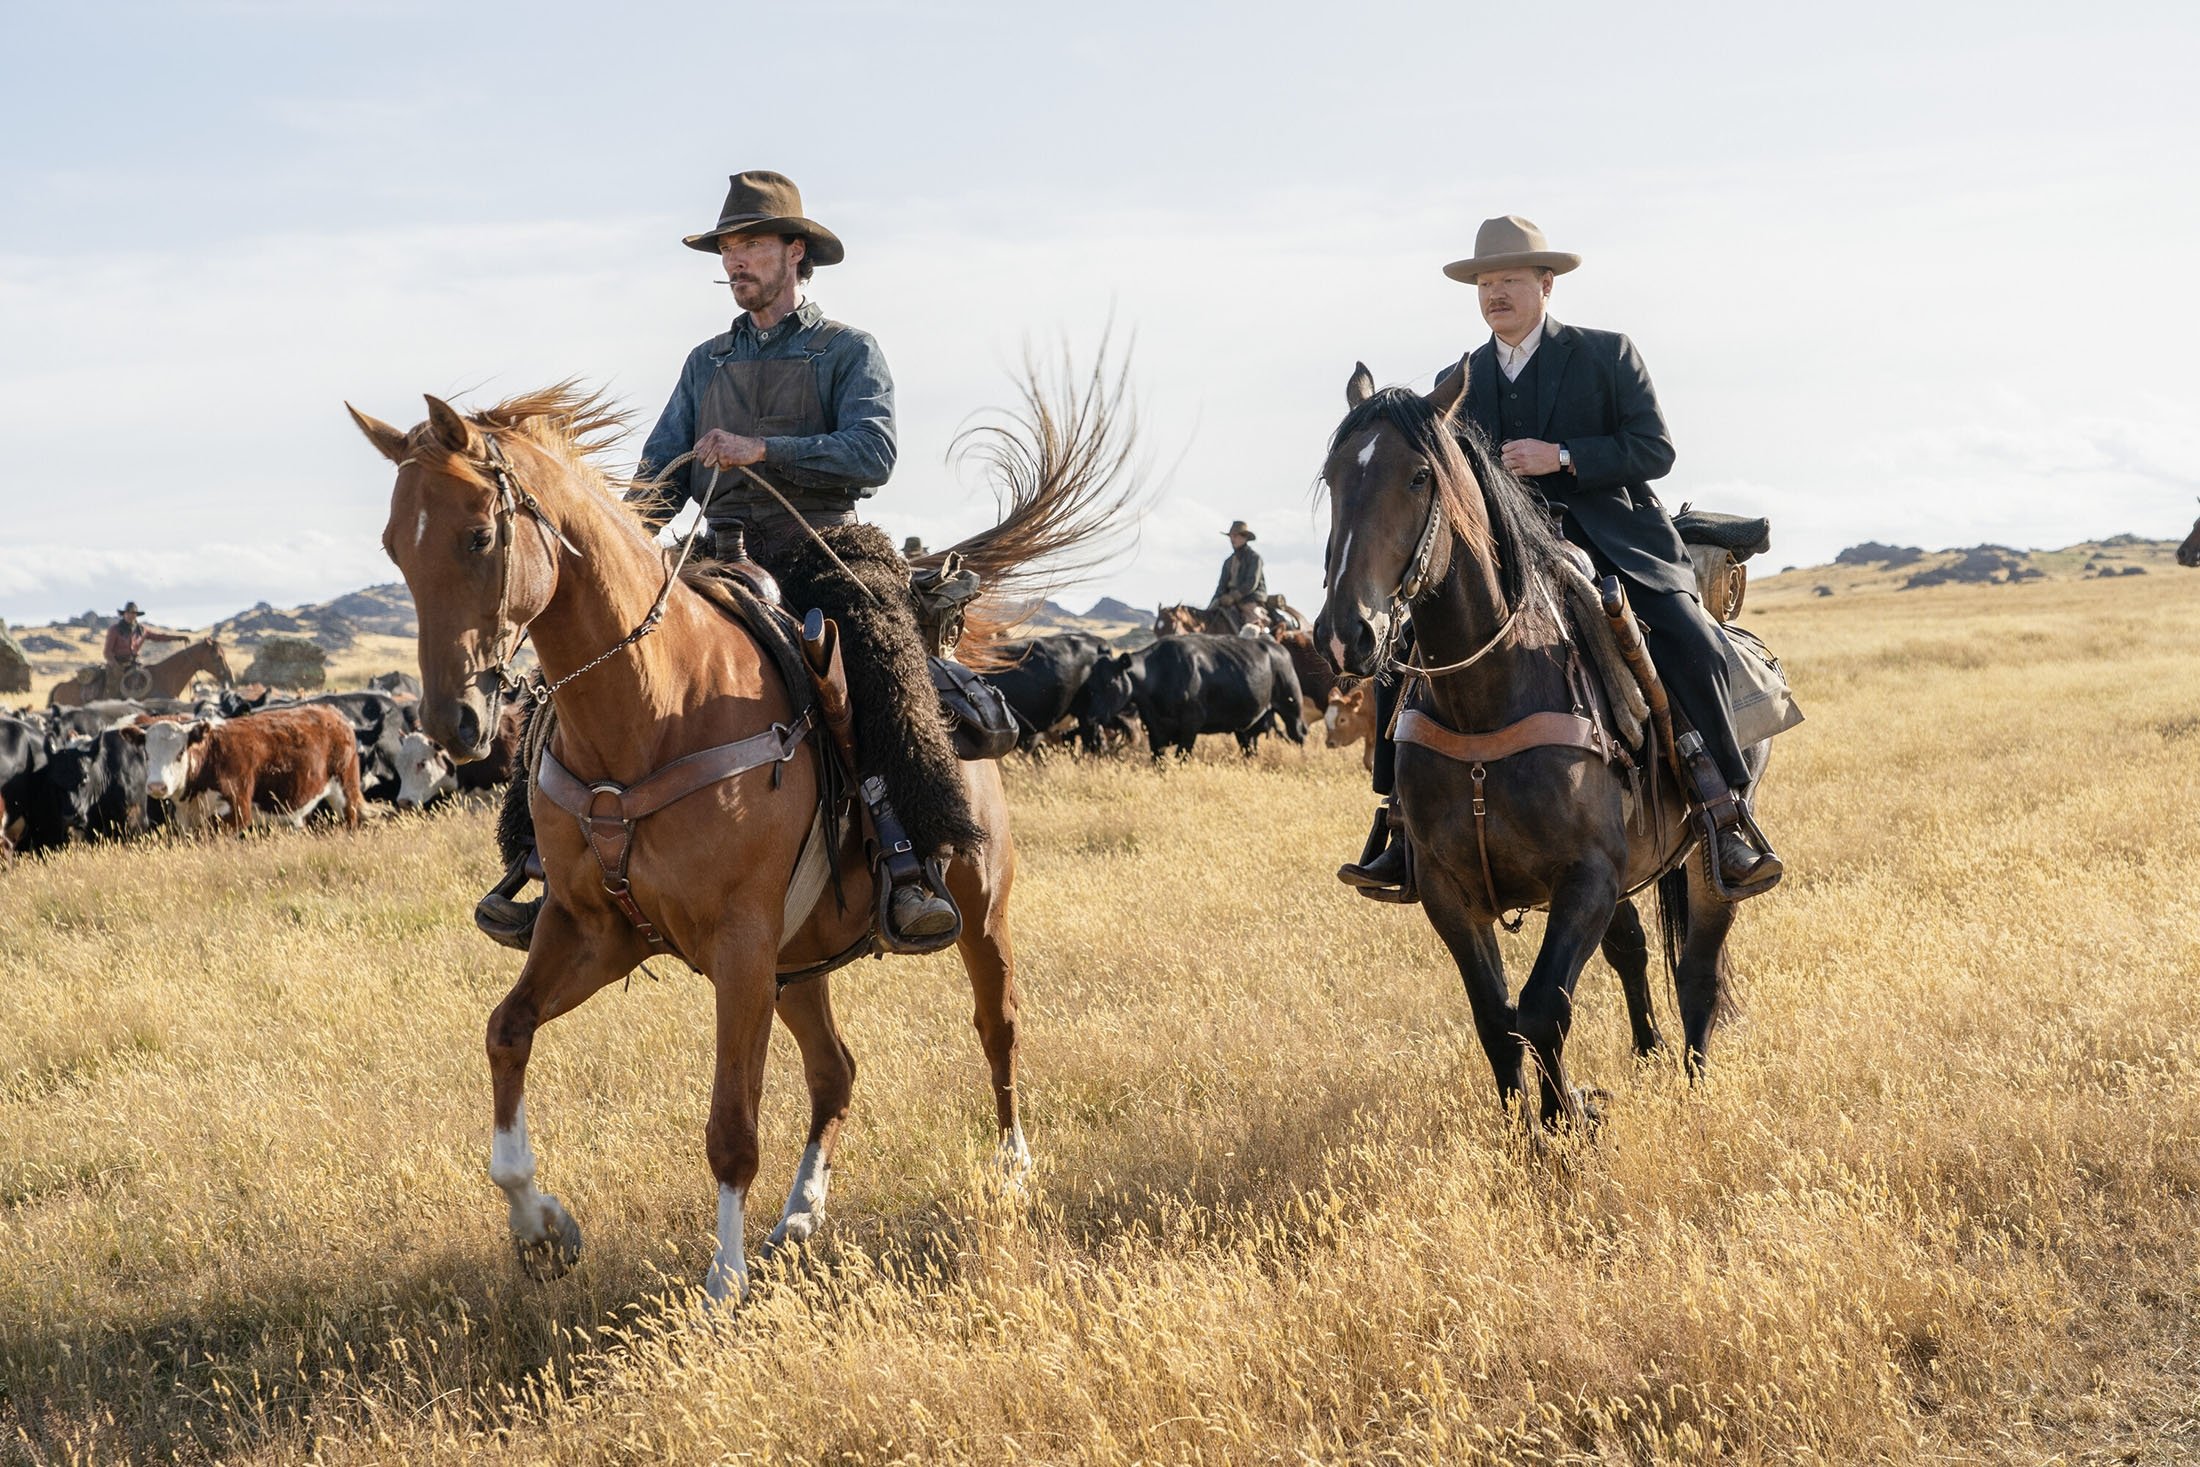 Benedict Cumberbatch (L), and Jesse Plemons ride horses, in a scene from the film "The Power of the Dog." (Netflix via AP)